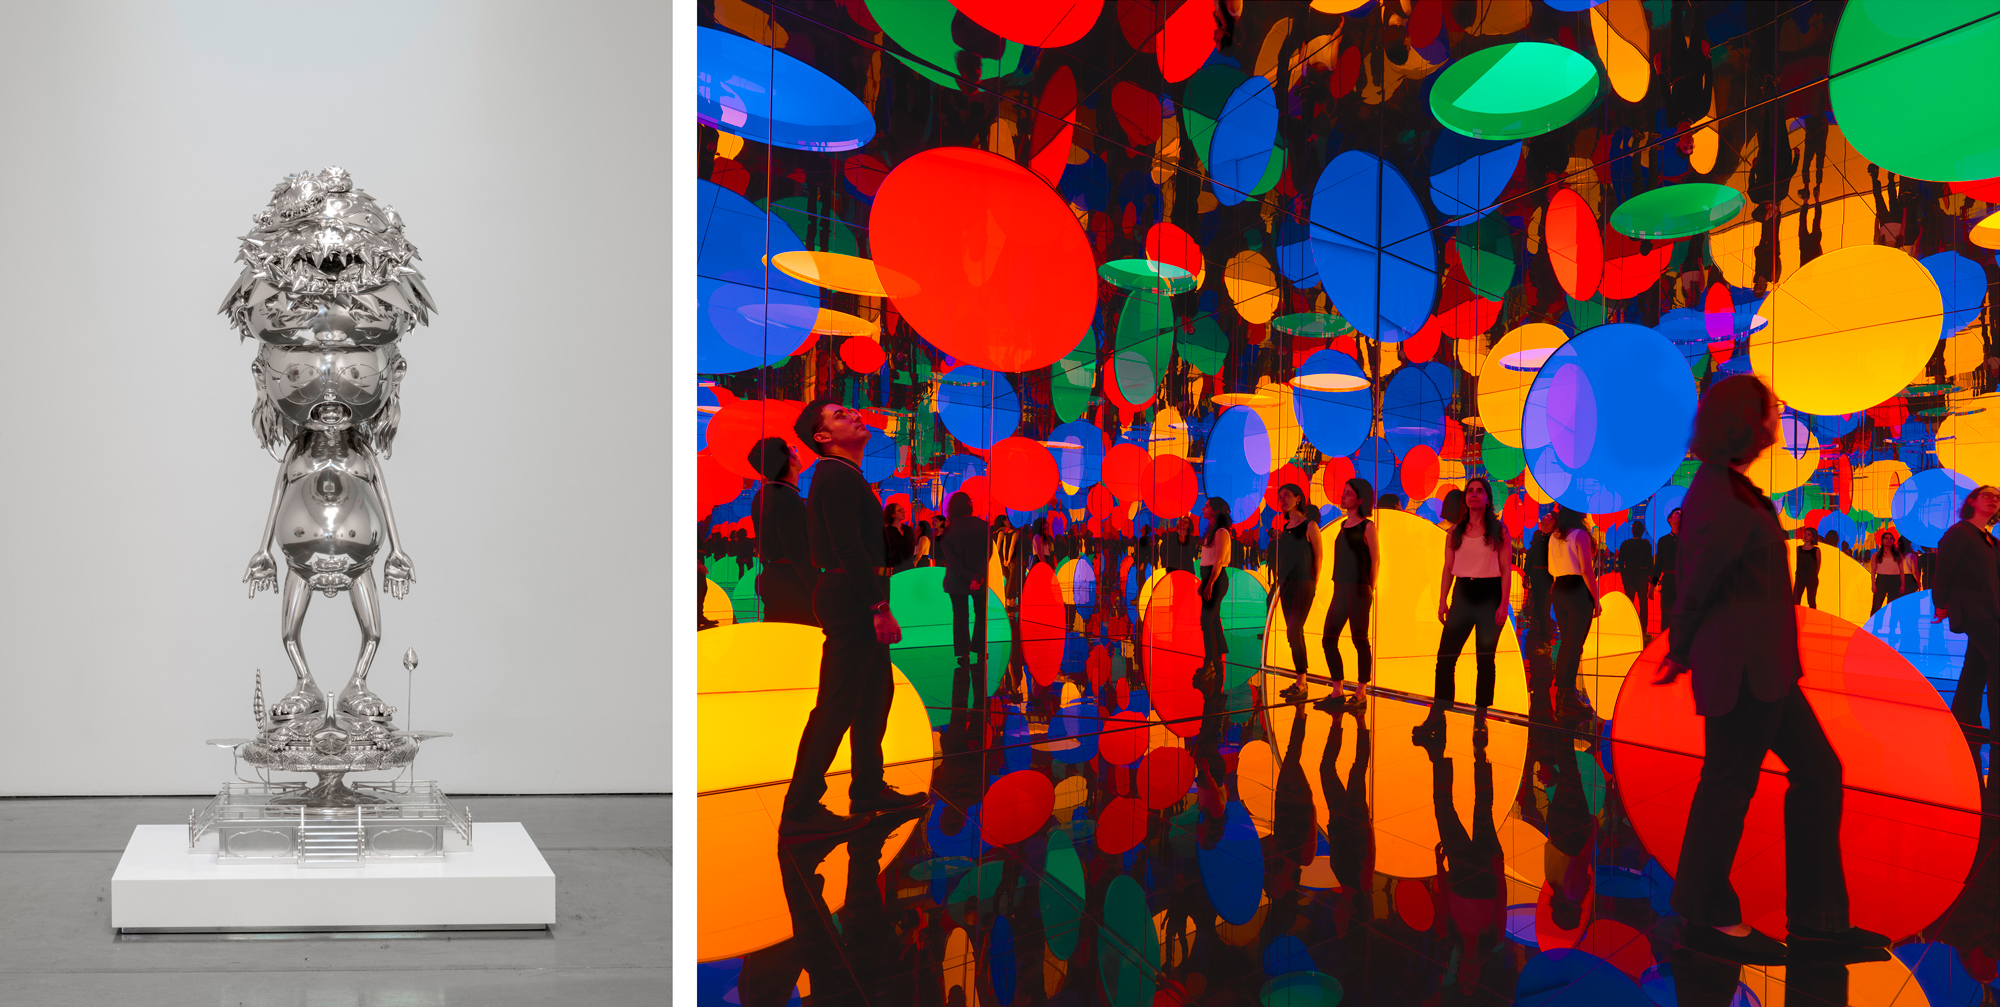 At left a silver monster sculpture on a low white pedestal, at right a mirrored room of multicolored circles and people reflected